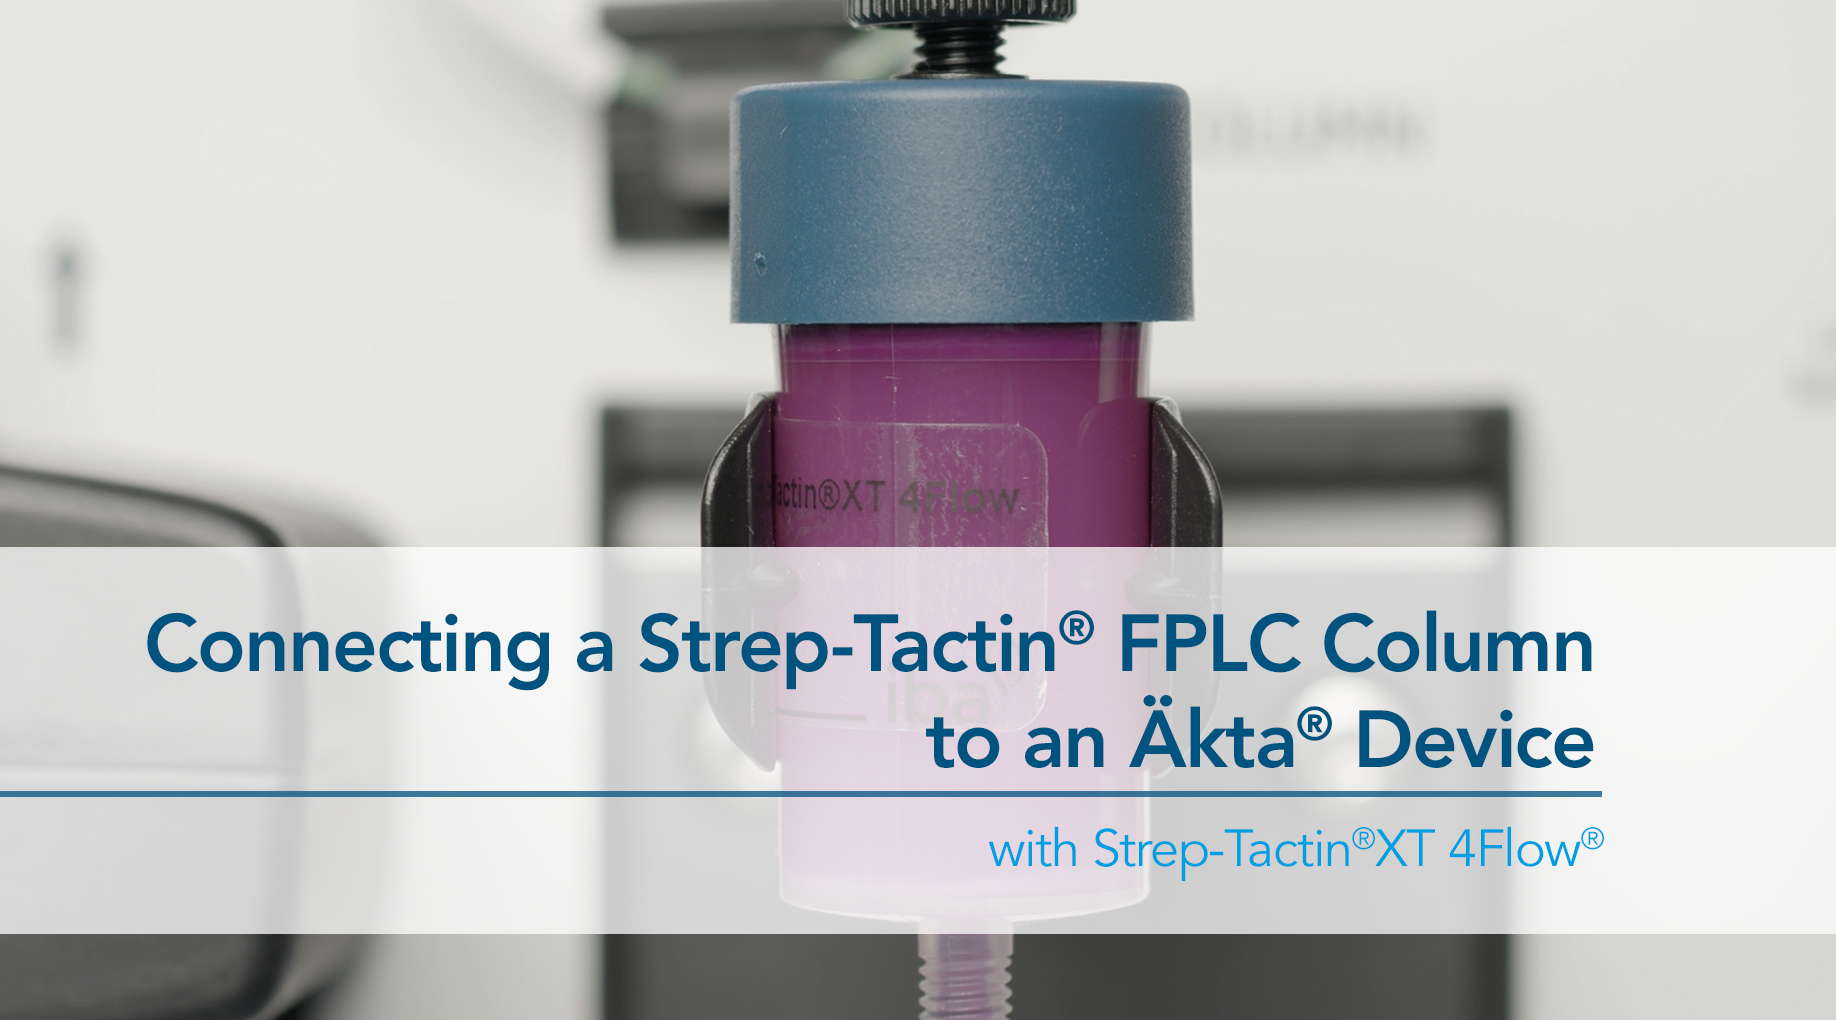 Thumbnail for connecting fplc column to an akta device video